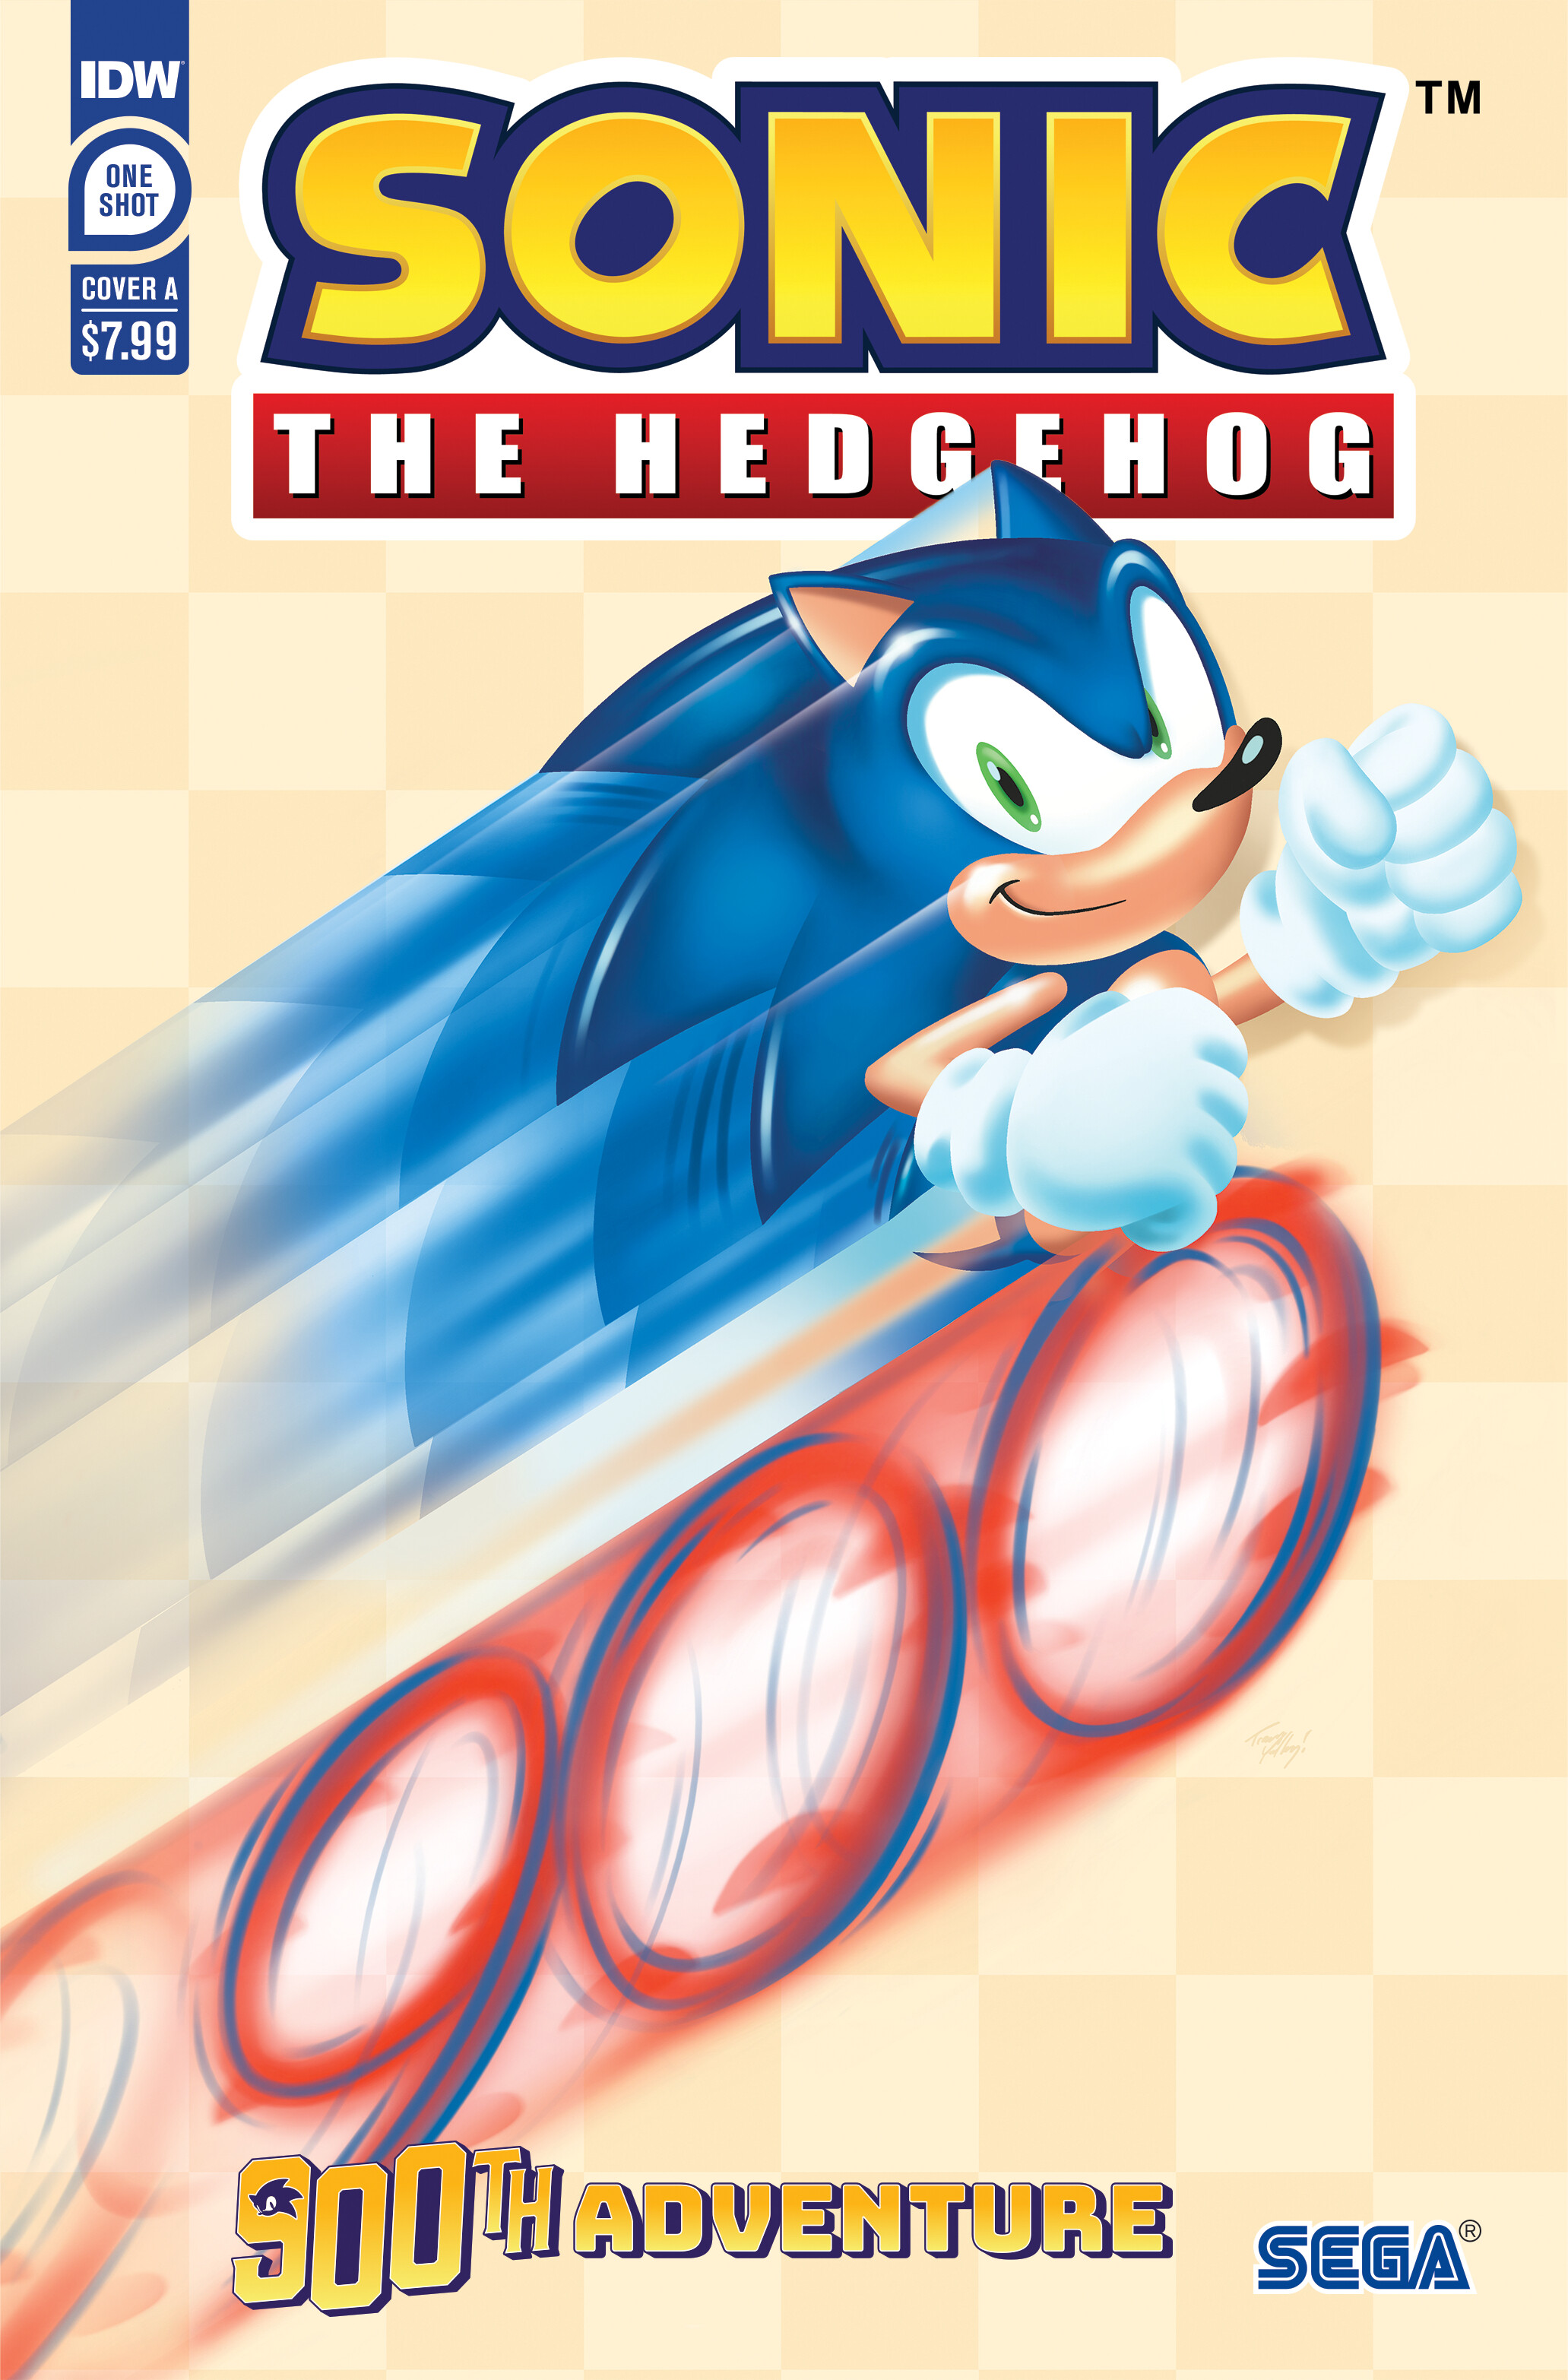 Sonic the Hedgehog's 900th Adventure Comic Release Day